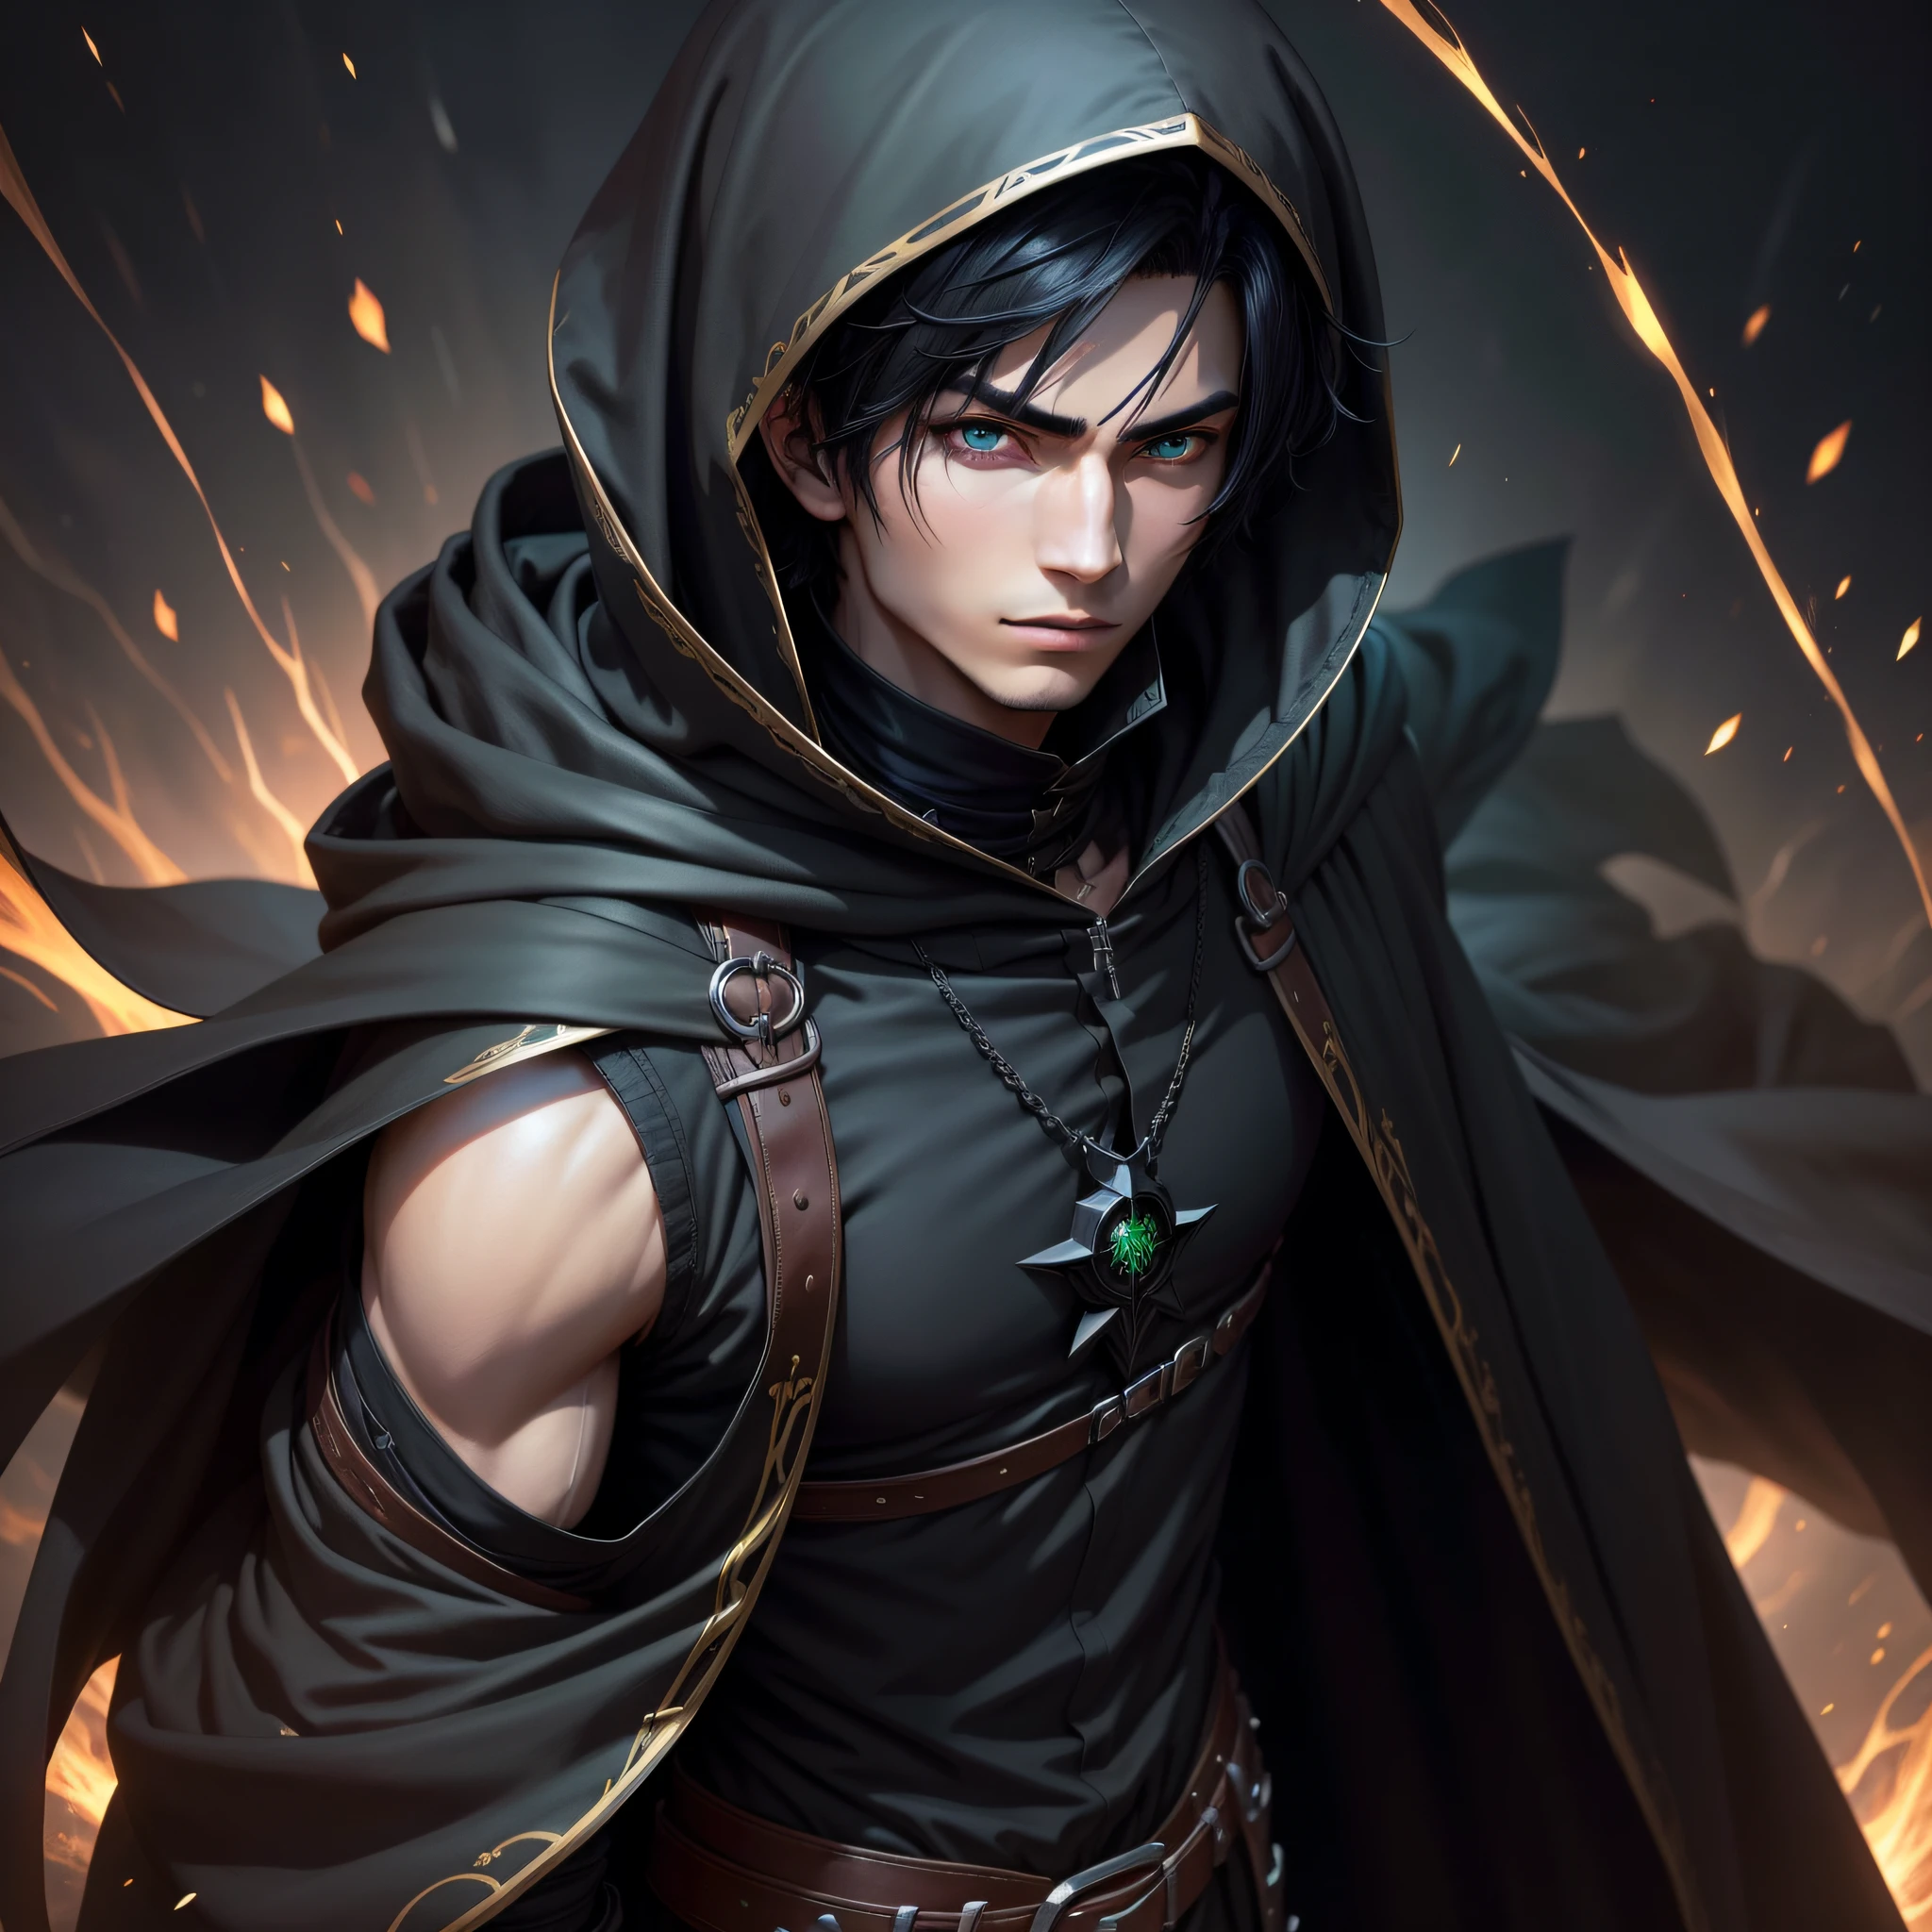 Dark mage, male, anime style, short black hair, black mantle with hood, black color, green magic, youth, European, normal eyes
Copy Prompt